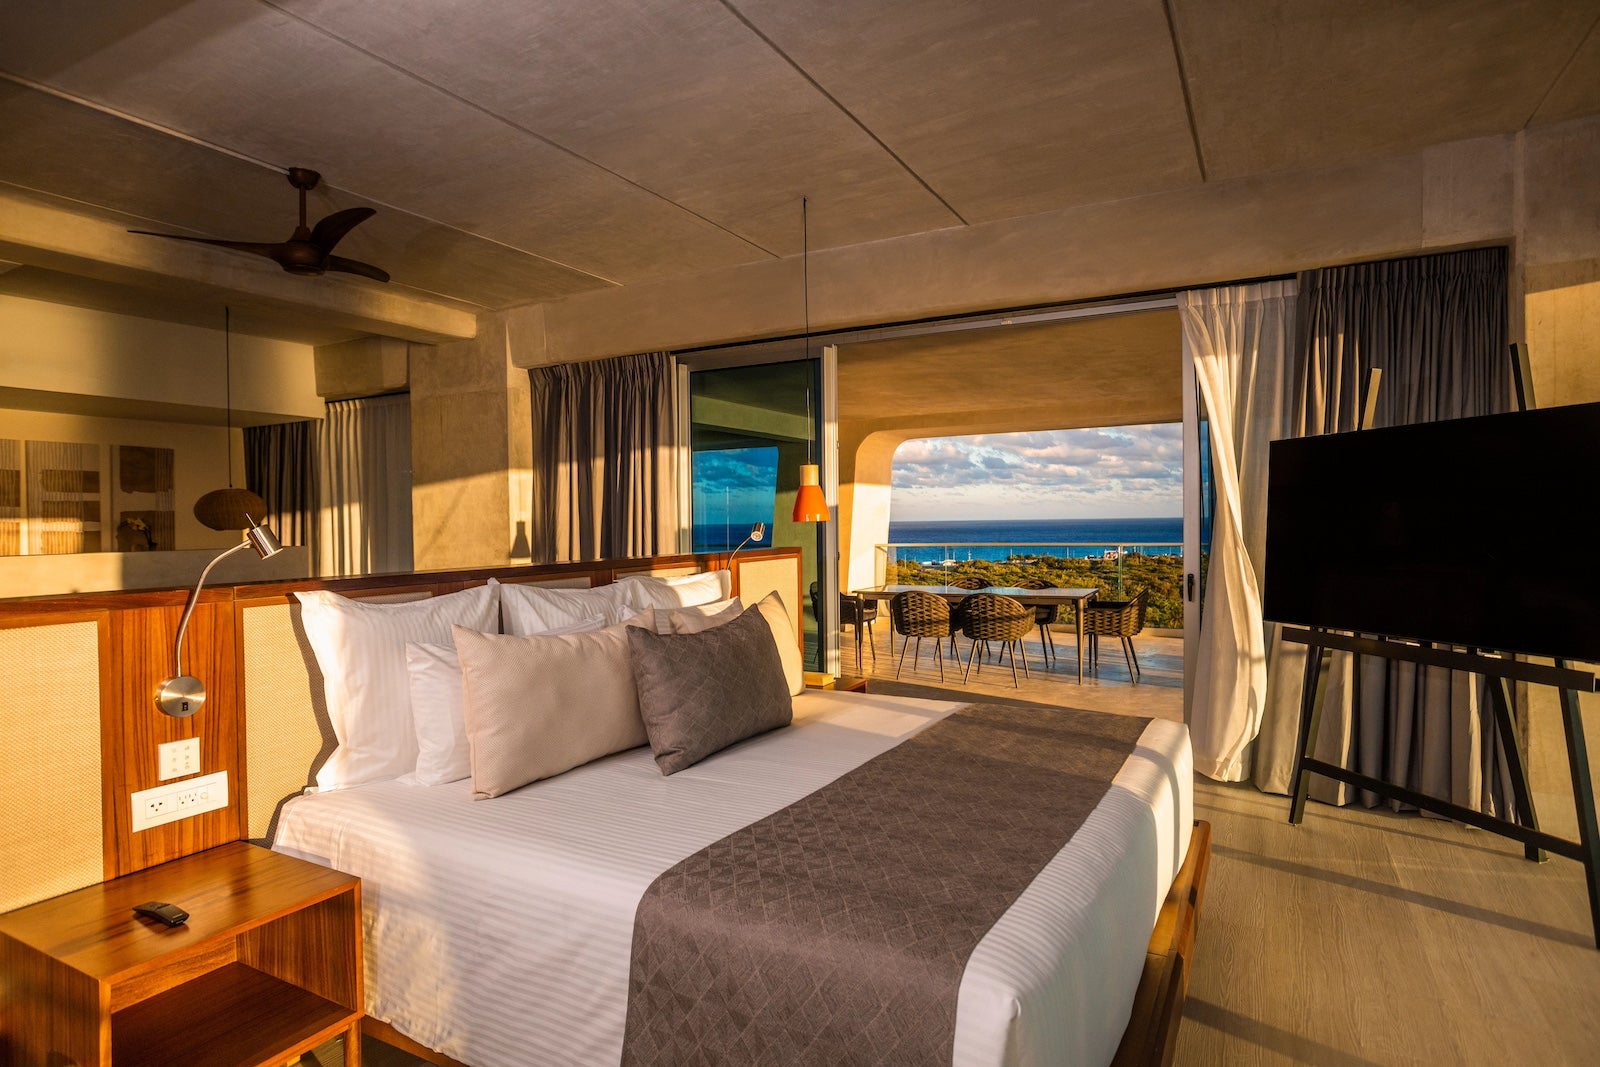 The first Hyatt Vivid all-inclusive resort opens in Cancun